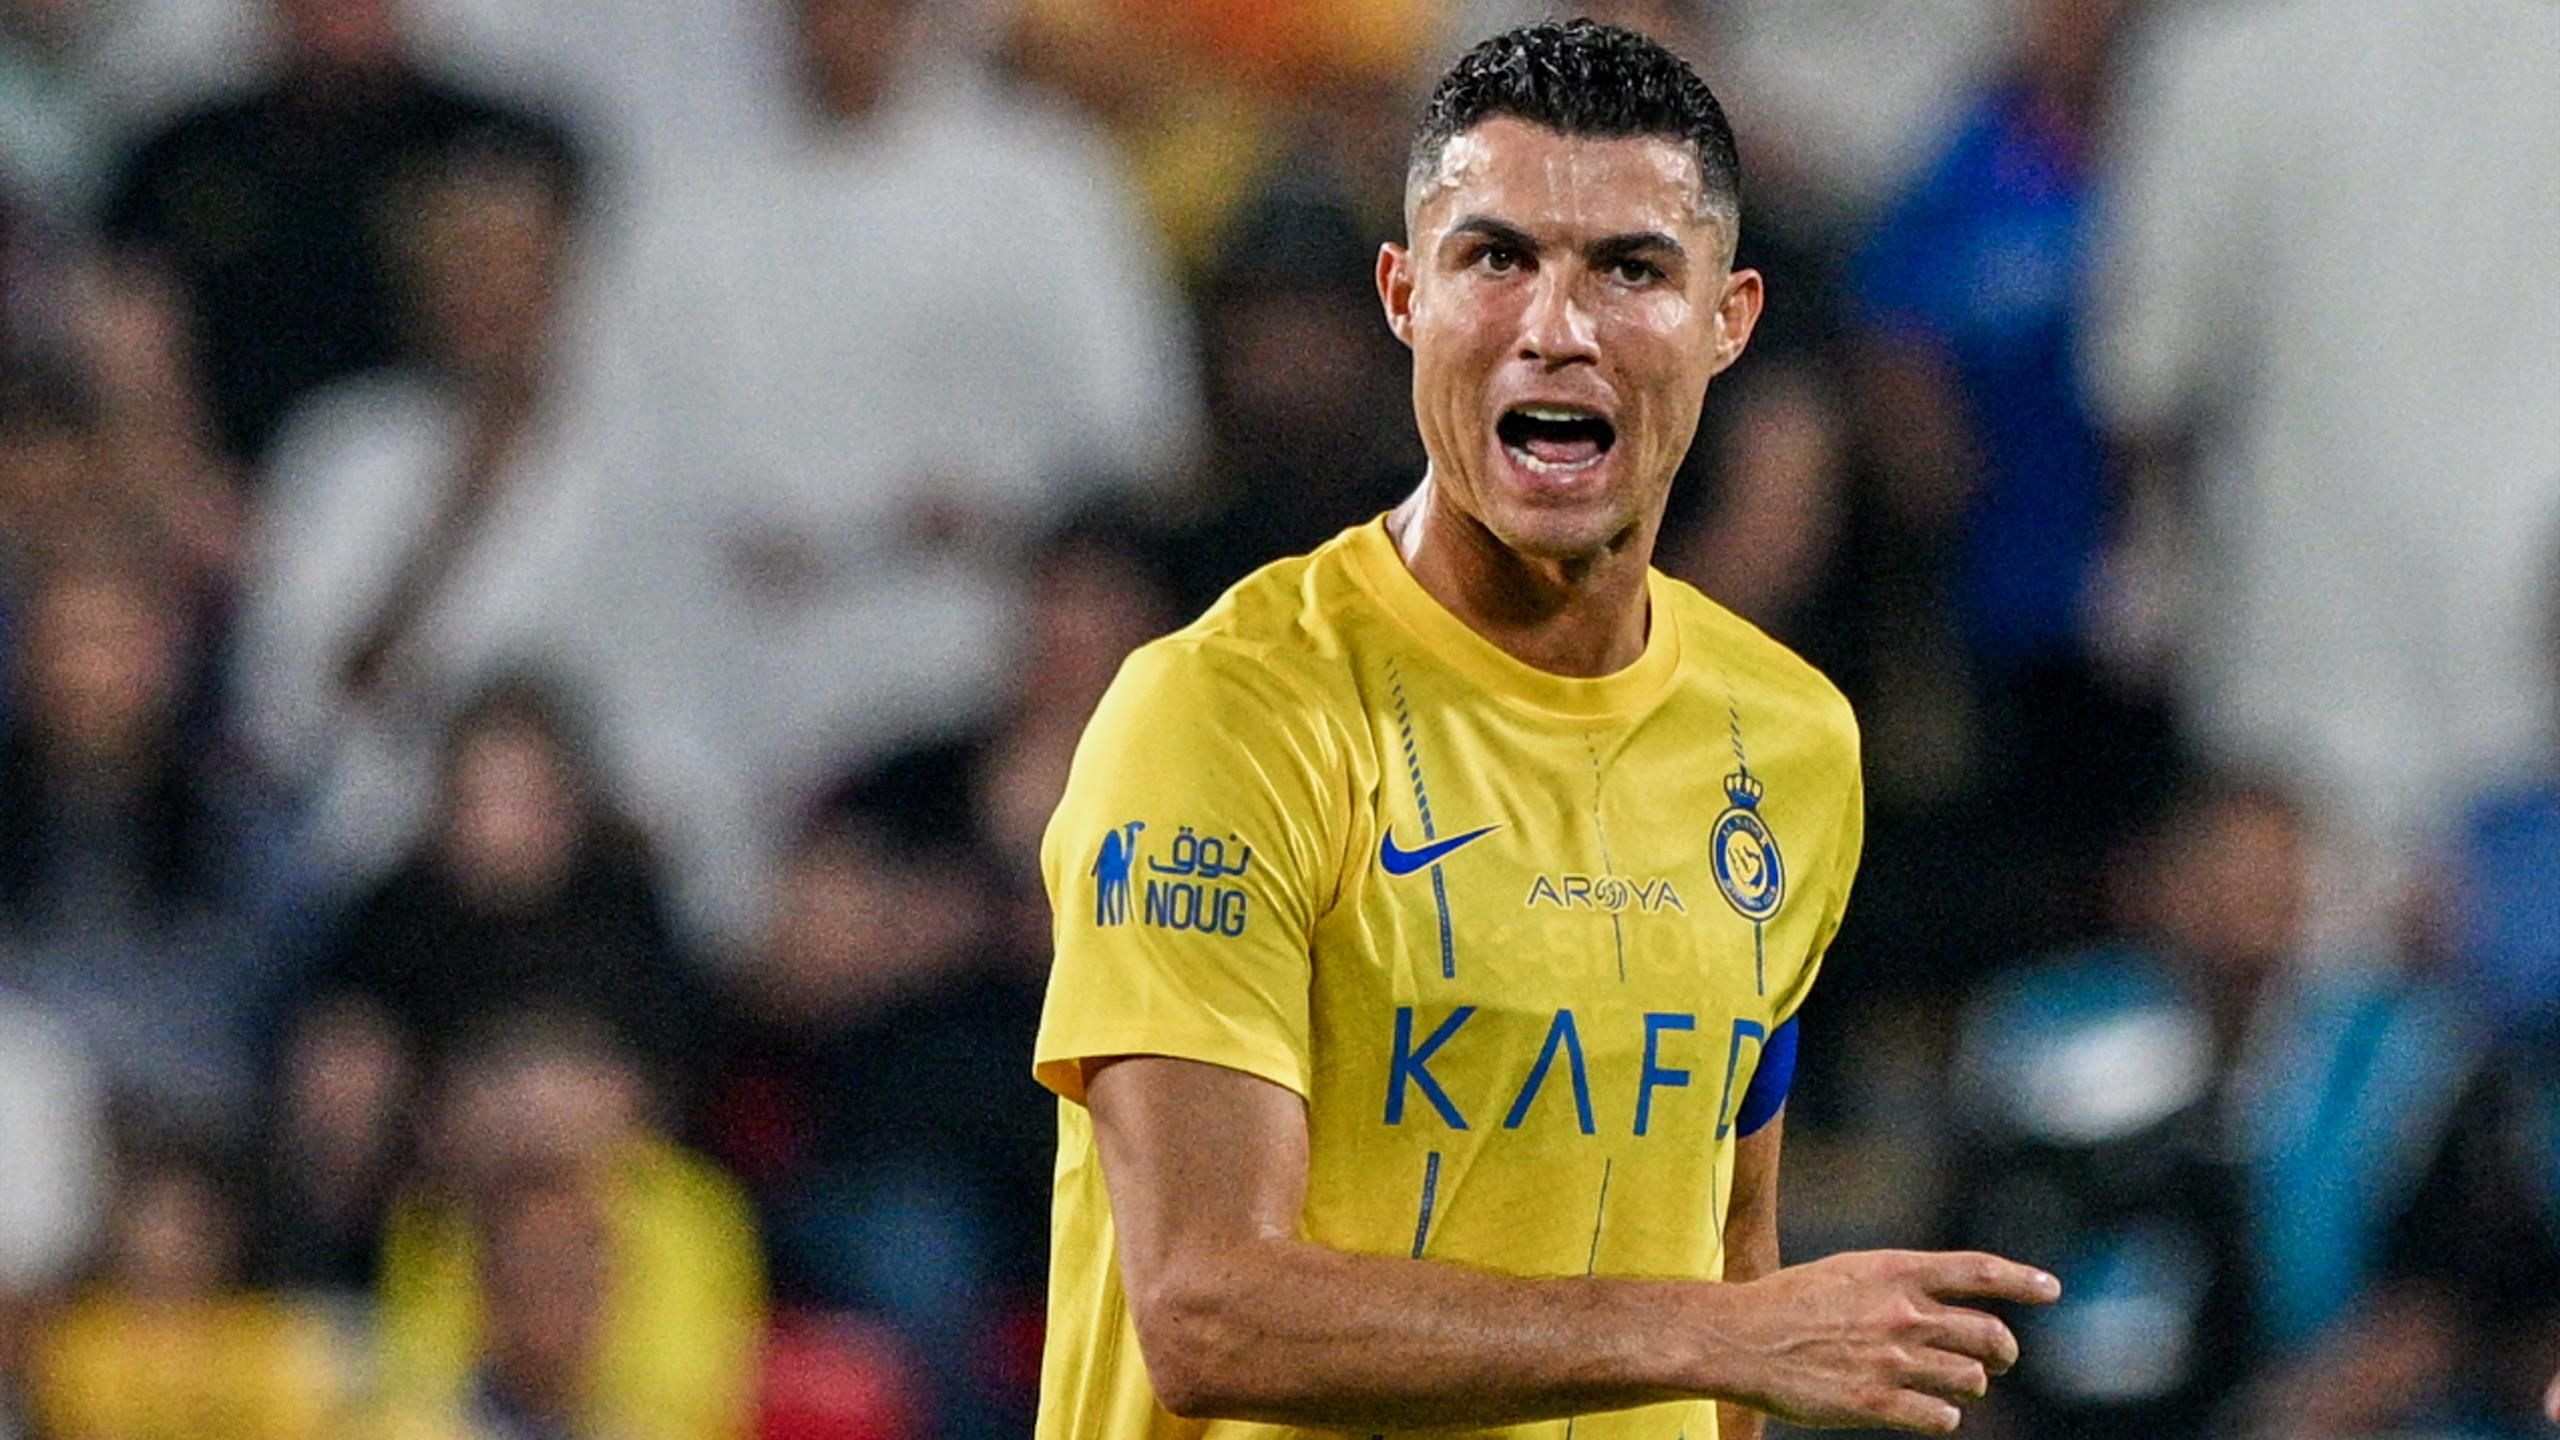 Cristiano Ronaldo is horrified when Al-Nassr goes bankrupt: immediately red after being elbowed and threatening the referee